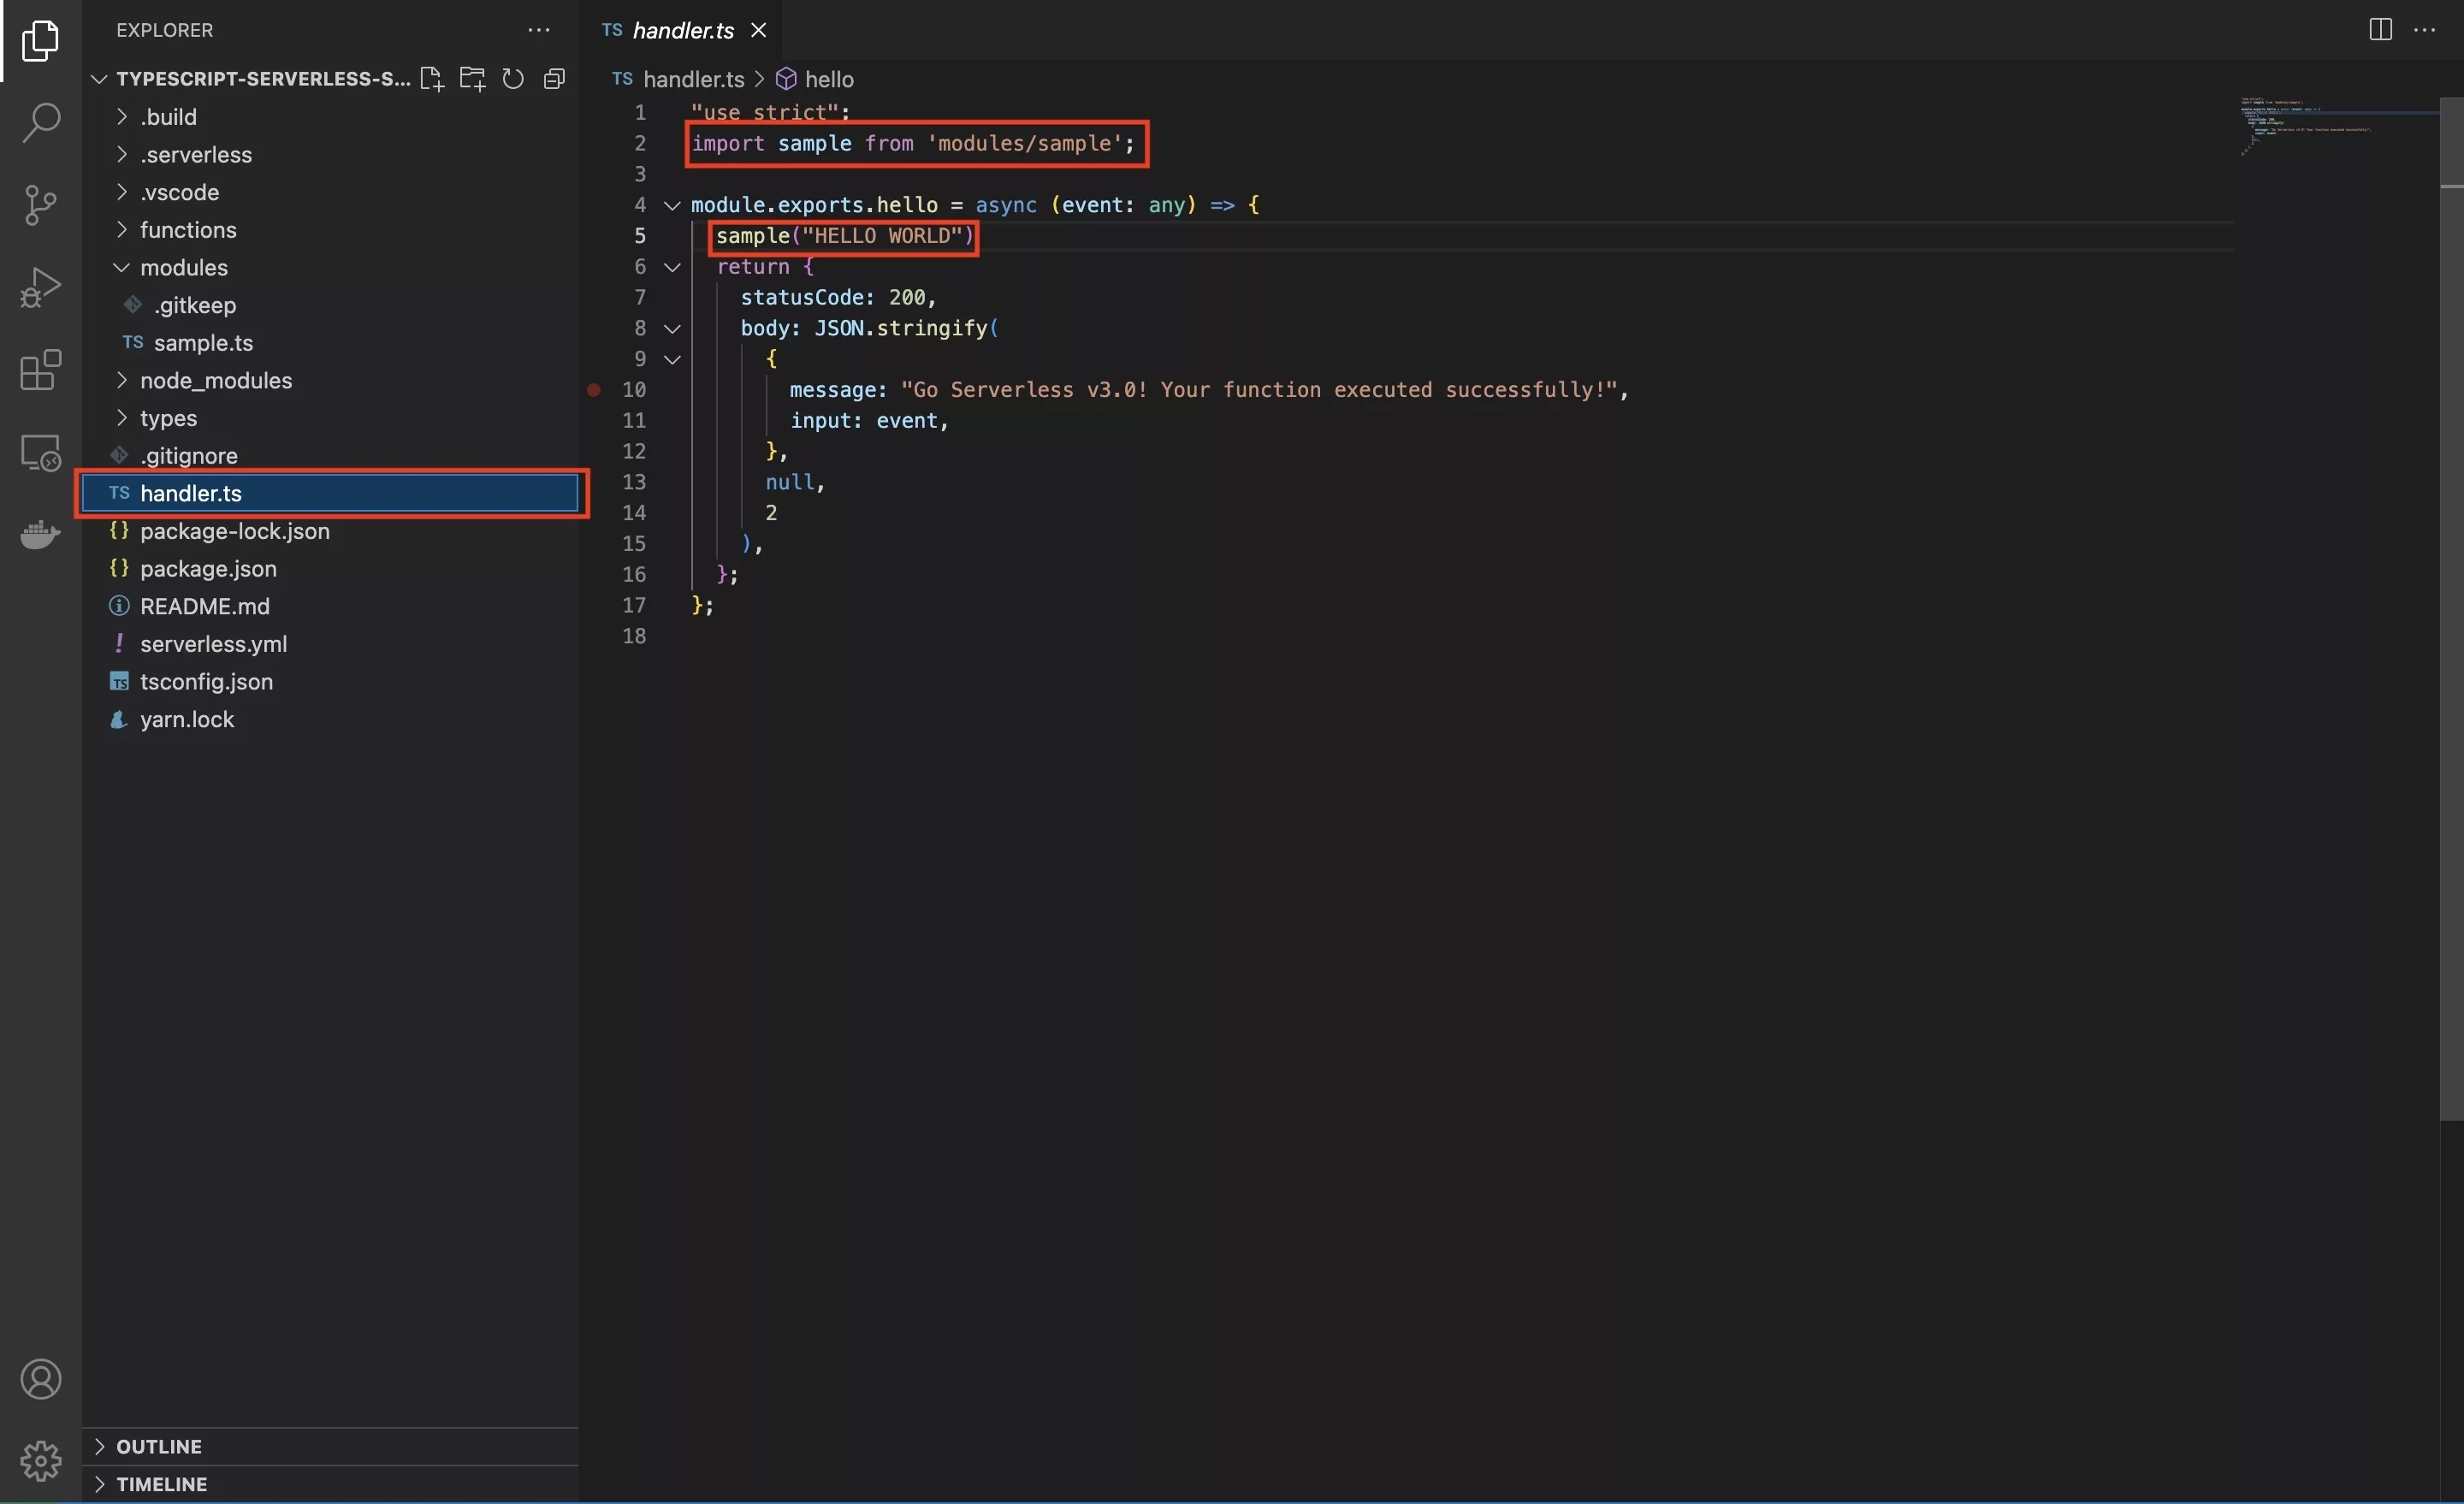 A screenshot of VSCode of the handler.ts file showing how we imported the Sample module and called the test function.